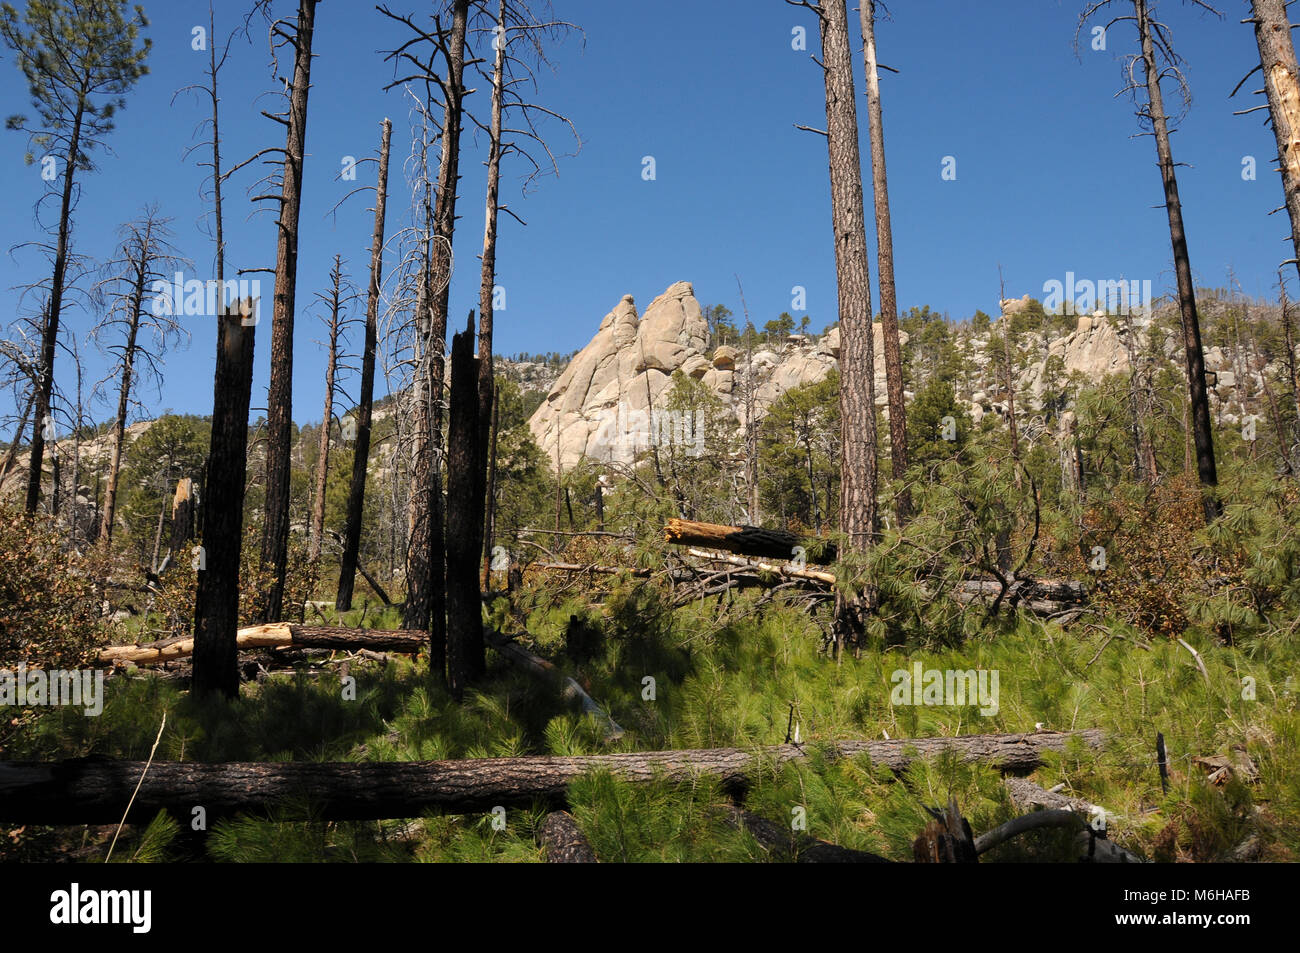 New growth of pines, ferns and other plants emerges from the forest floor following the Aspen Fire, Arizona Trail, Wilderness of Rocks Trail,  Trail,  Stock Photo